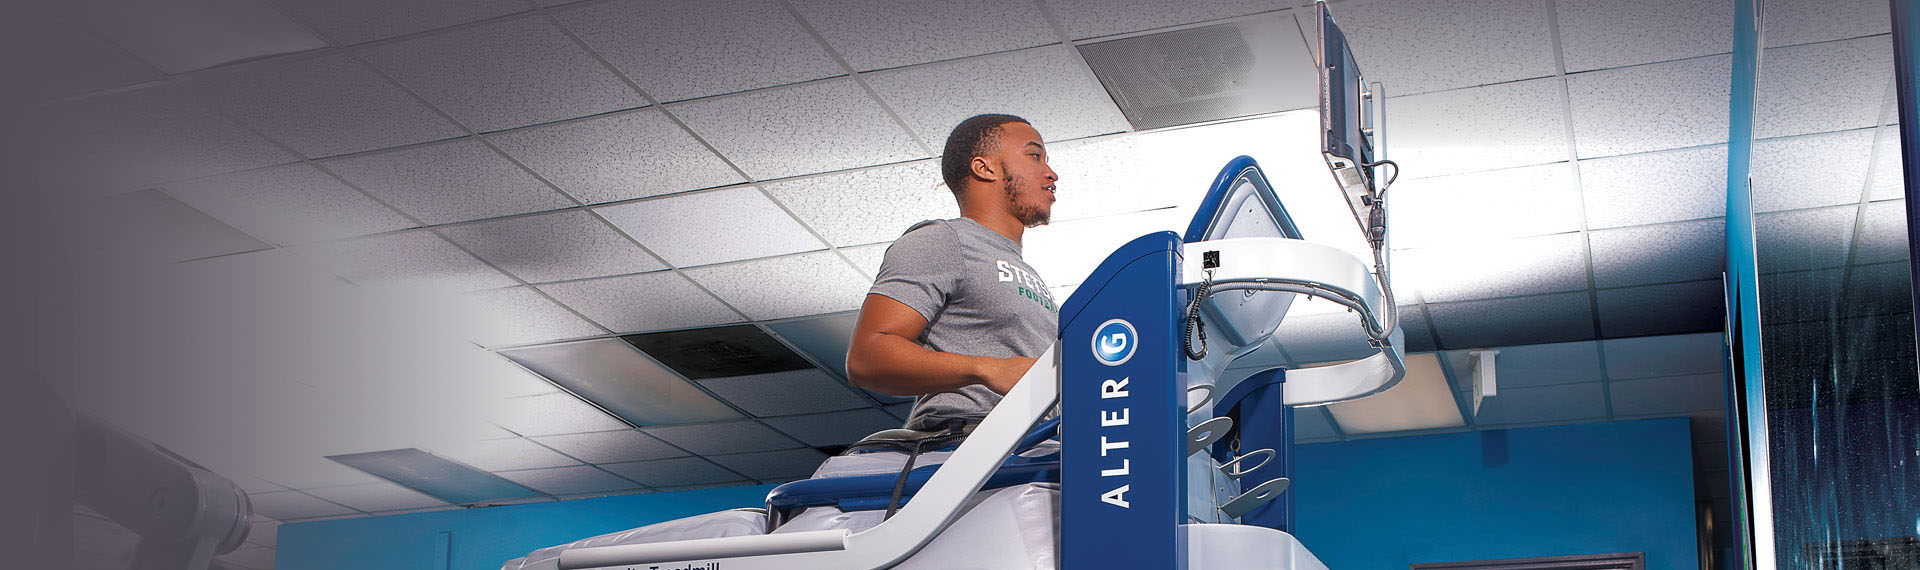 AlterG: Not Your Run-of-the-mill Treadmill